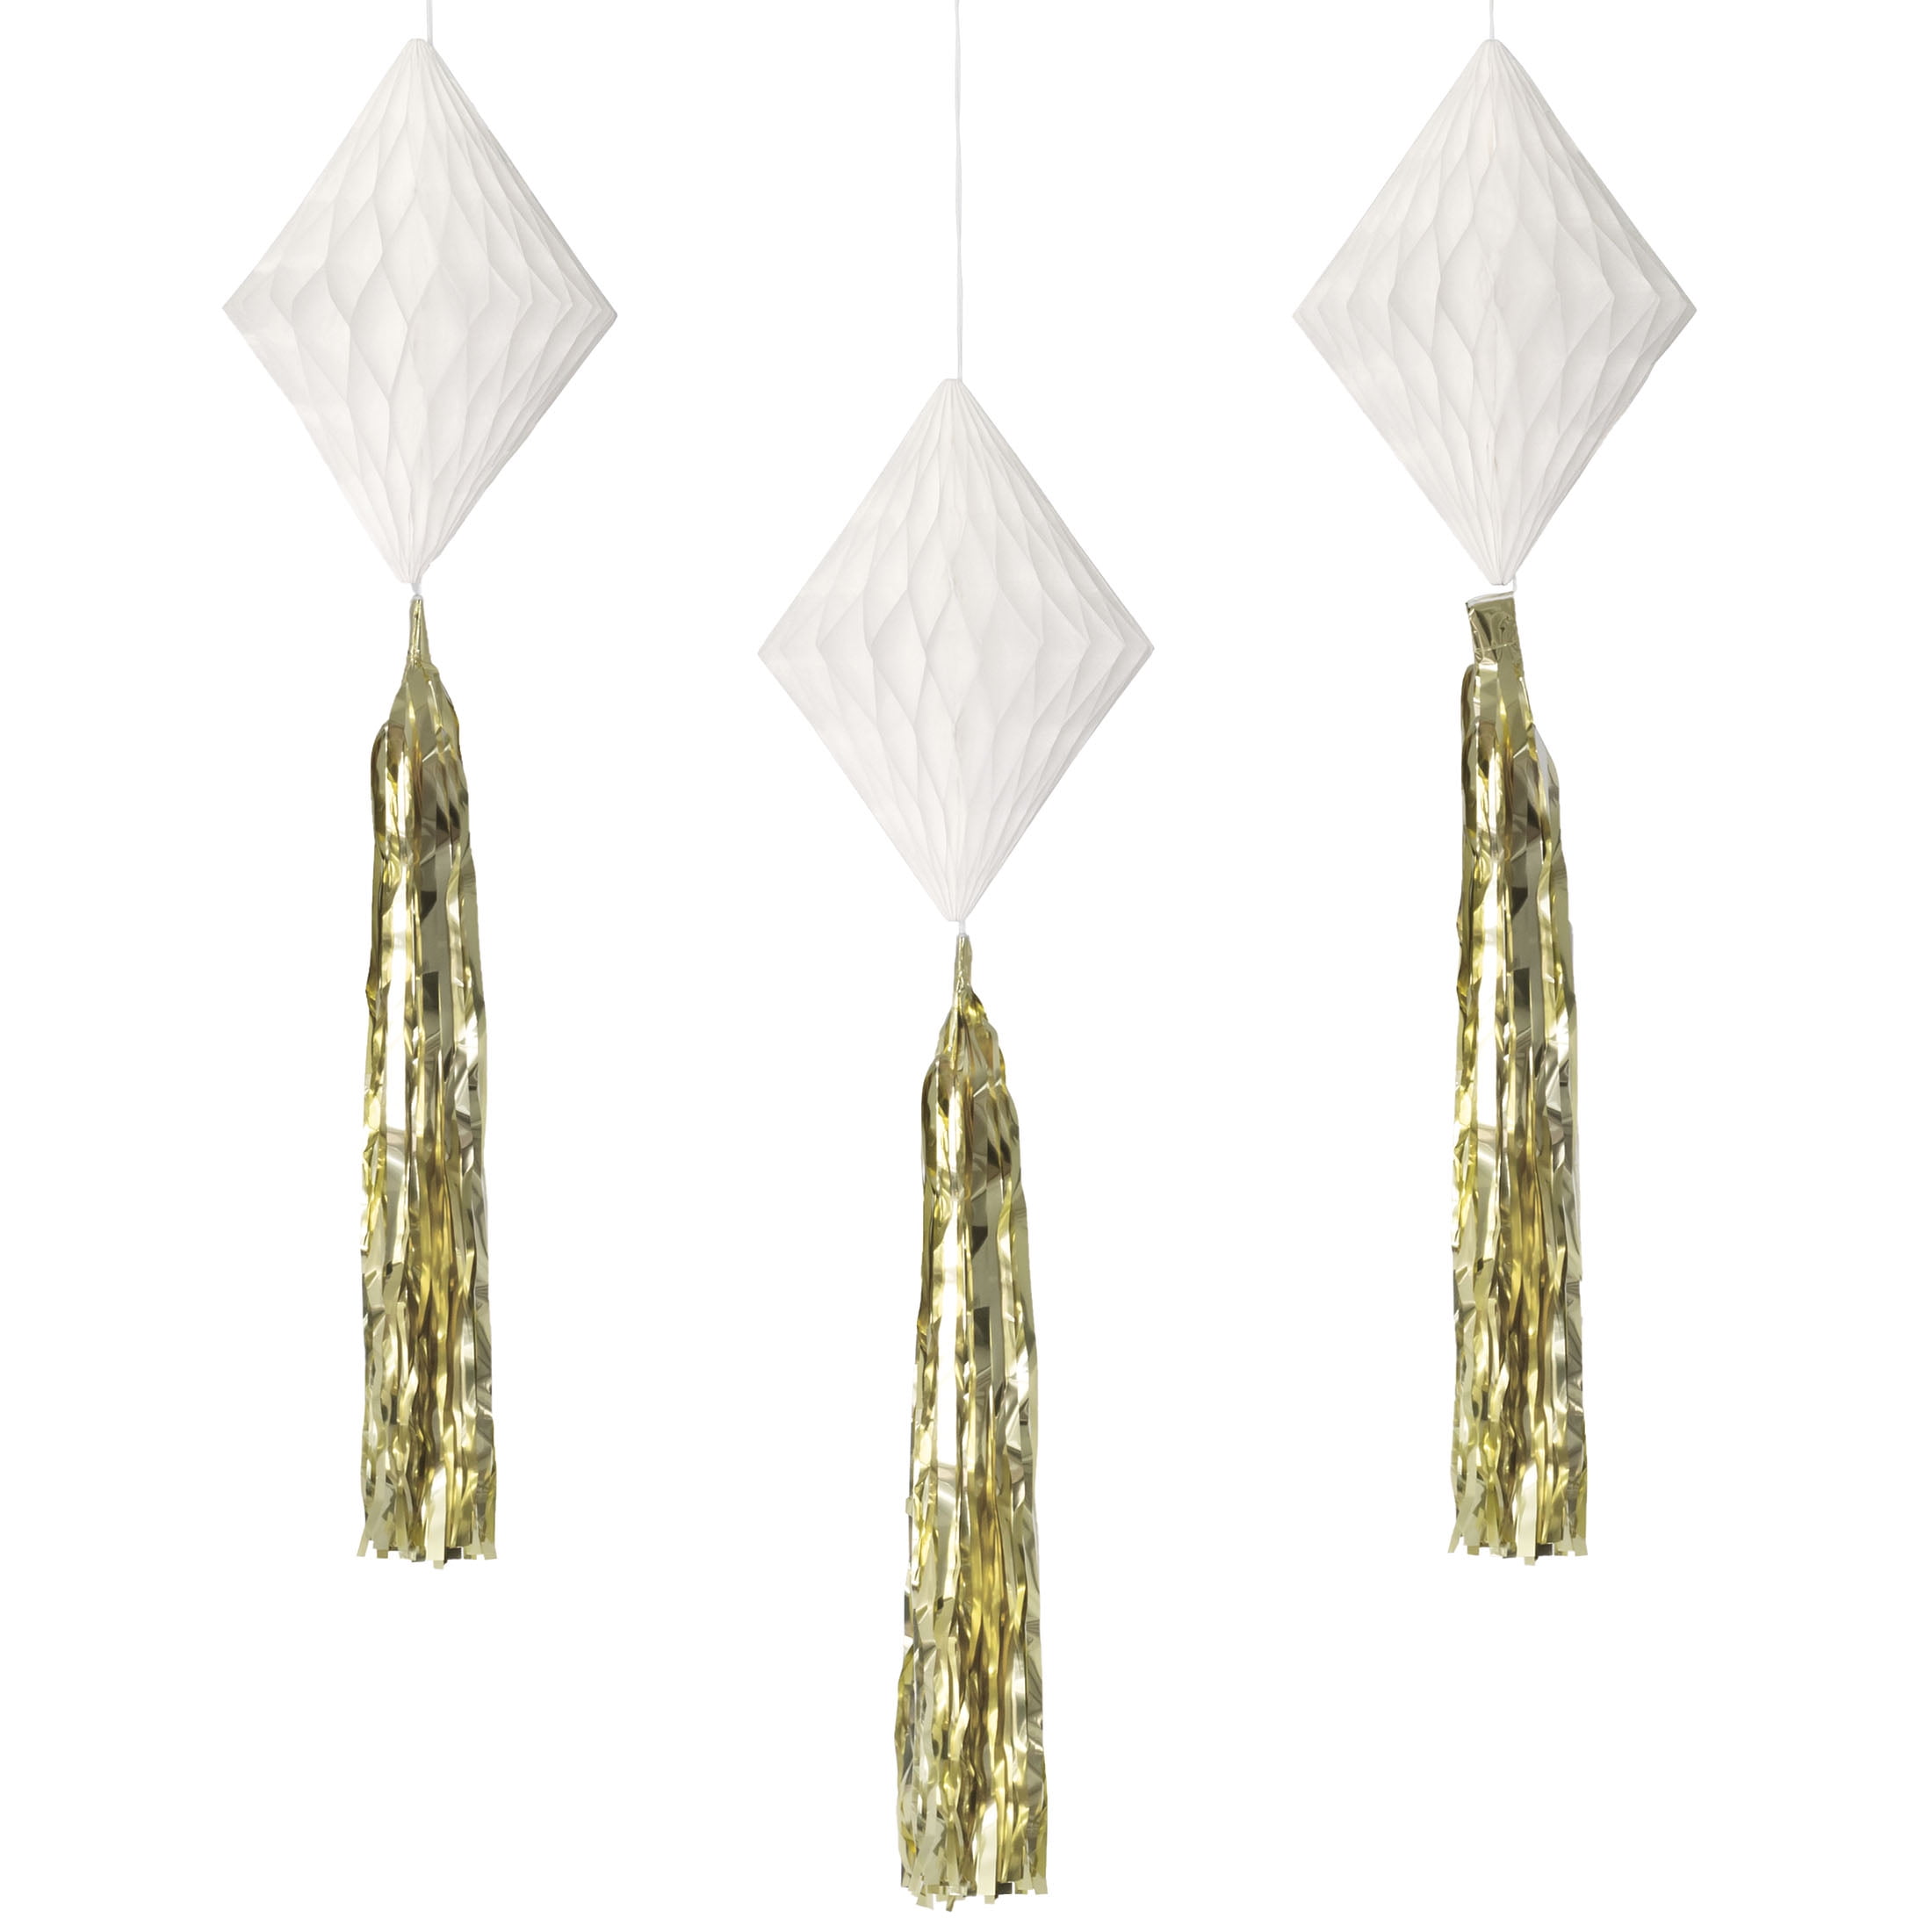 Way to Celebrate! White Tissue Paper Honeycomb Diamonds with Gold Tassels, 3ct